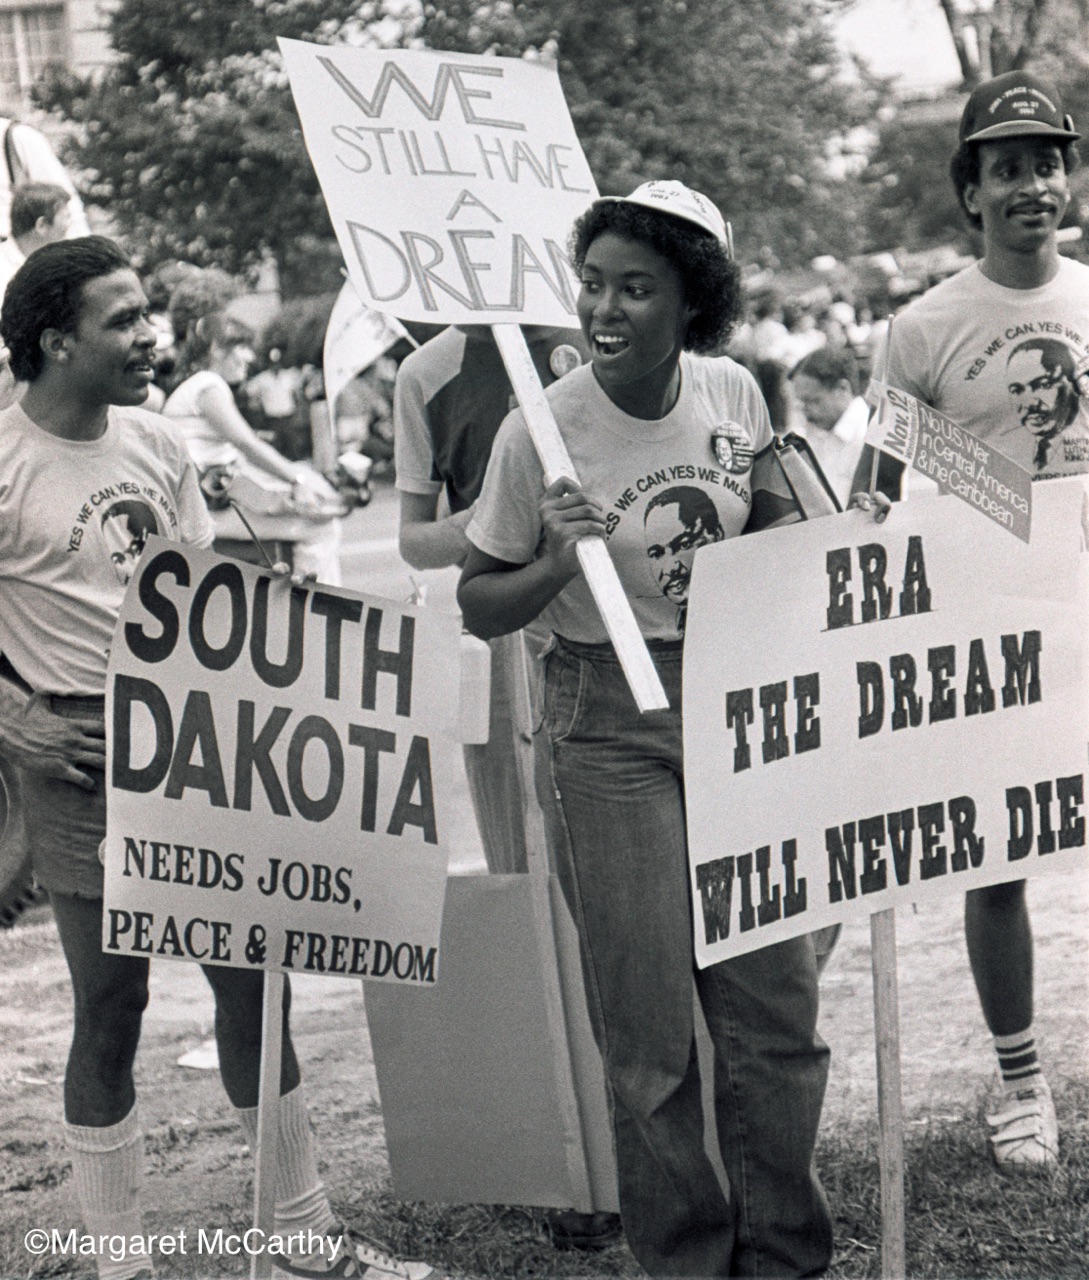 ERA: WE STILL HAVE A DREAM - March for Jobs, Peace, Justice; Washington, D.C. 1983